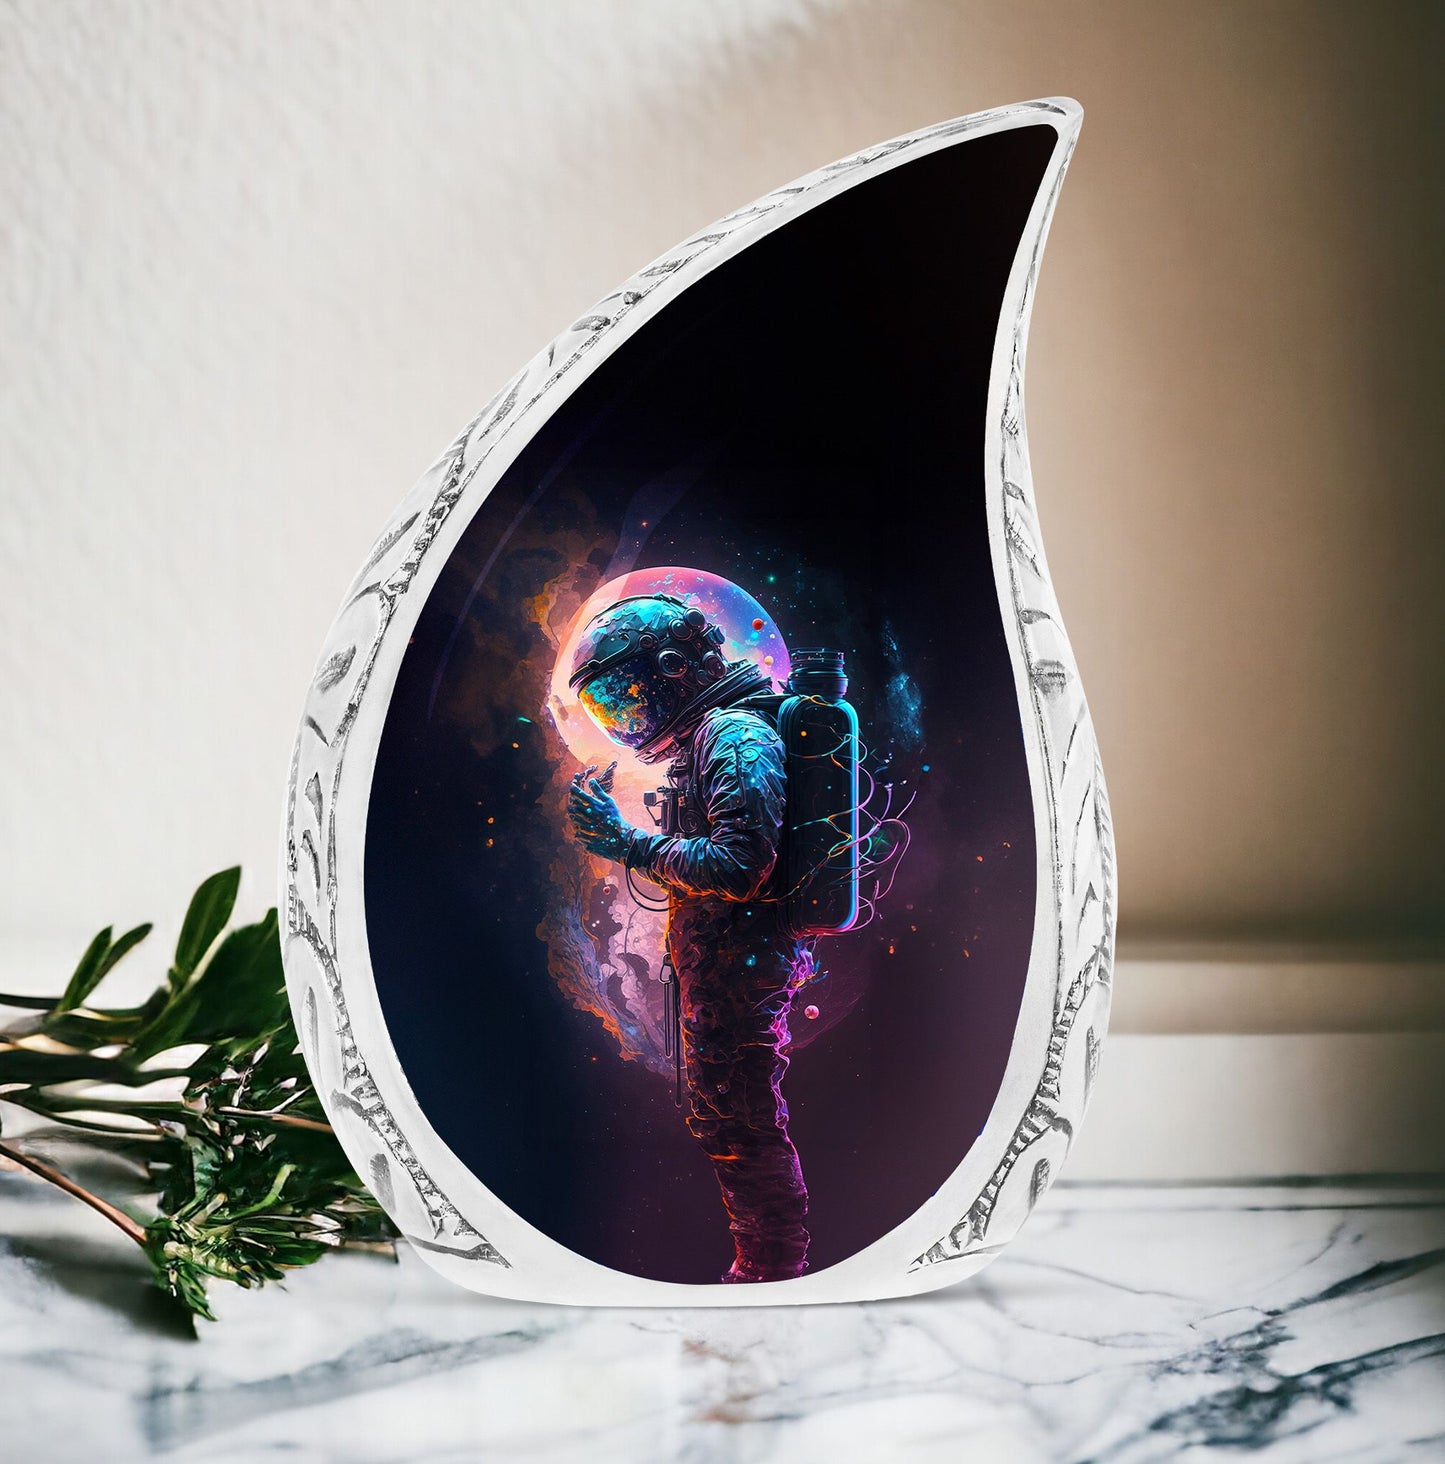 Large Astronaut Digital Art Burial urn, a unique cremation container for ashes of adults